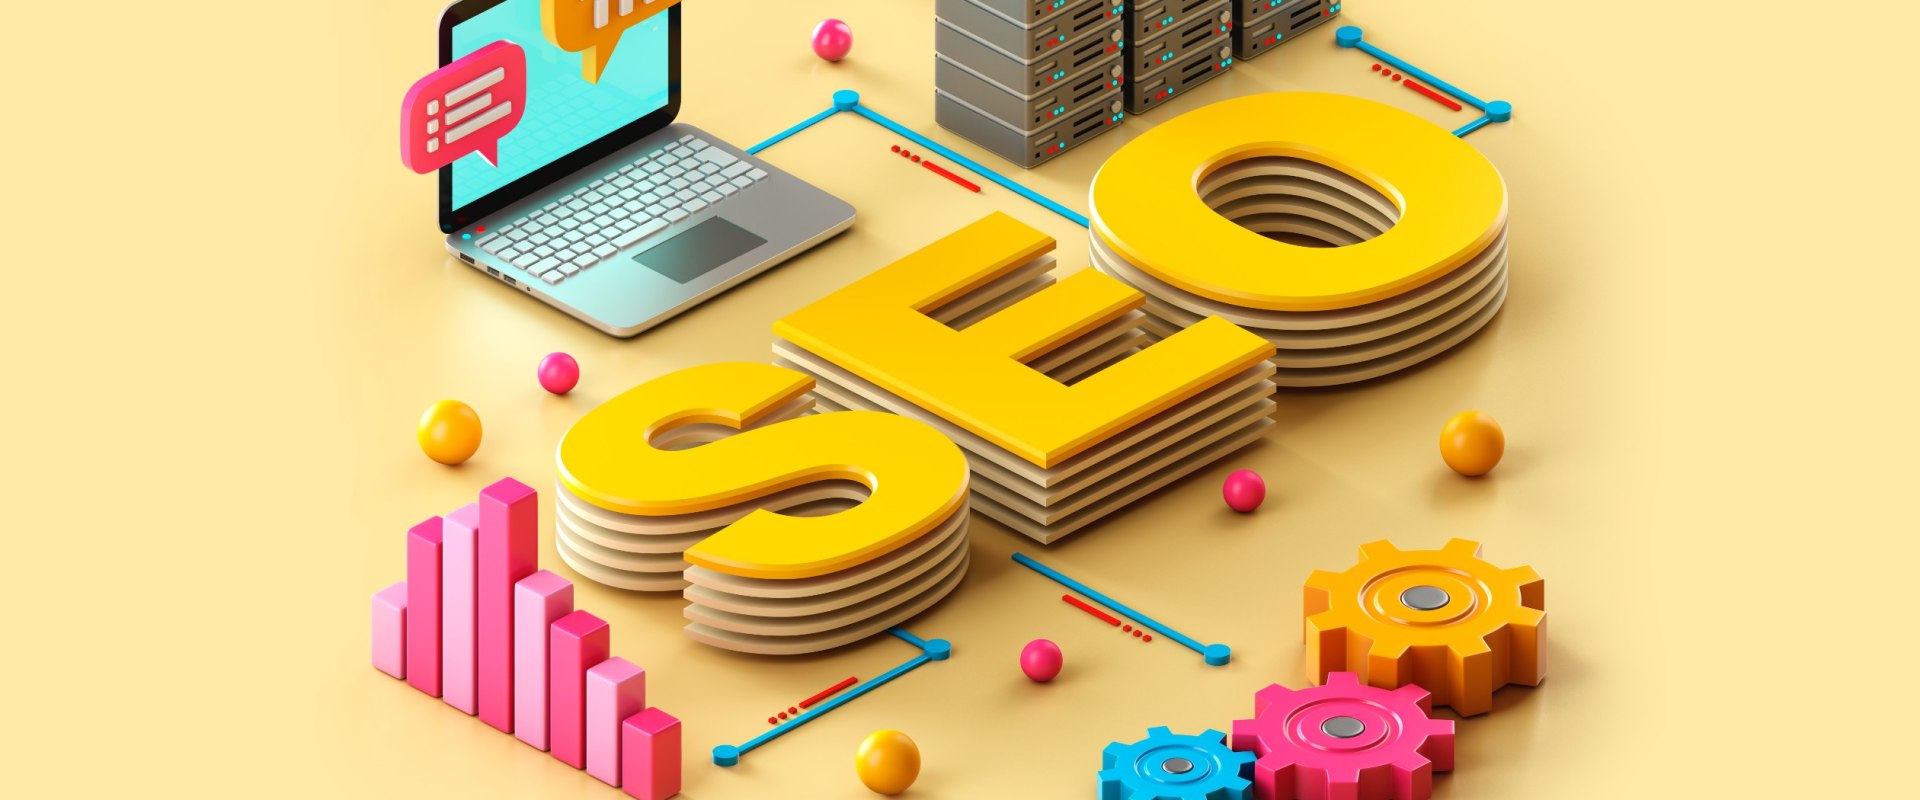 What are the latest trends in seo?